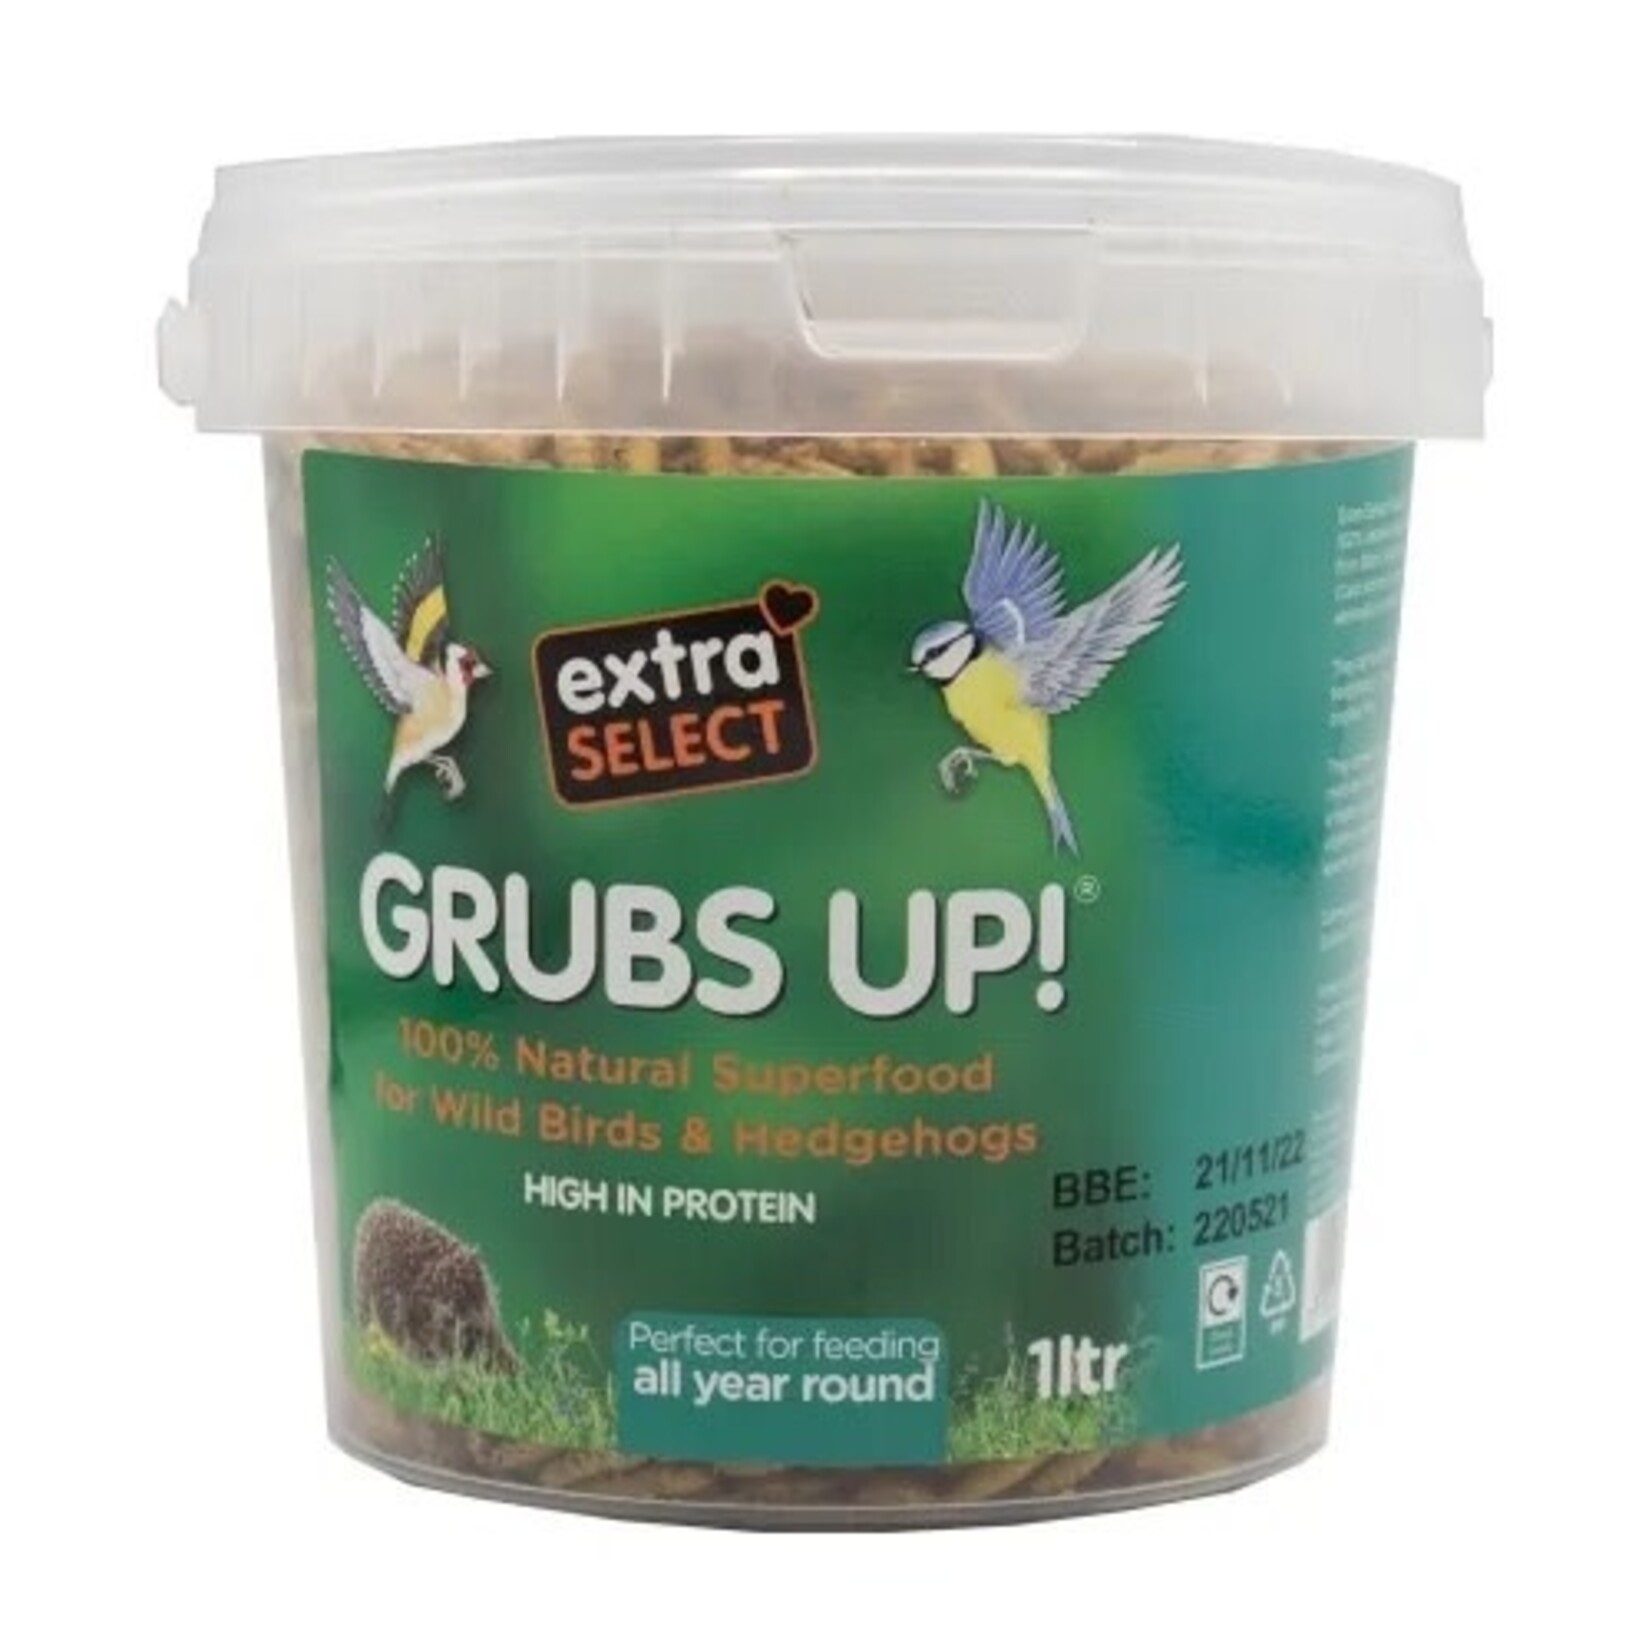 Extra Select Grubs Up! Superfood for Wild Birds & Hedgehogs